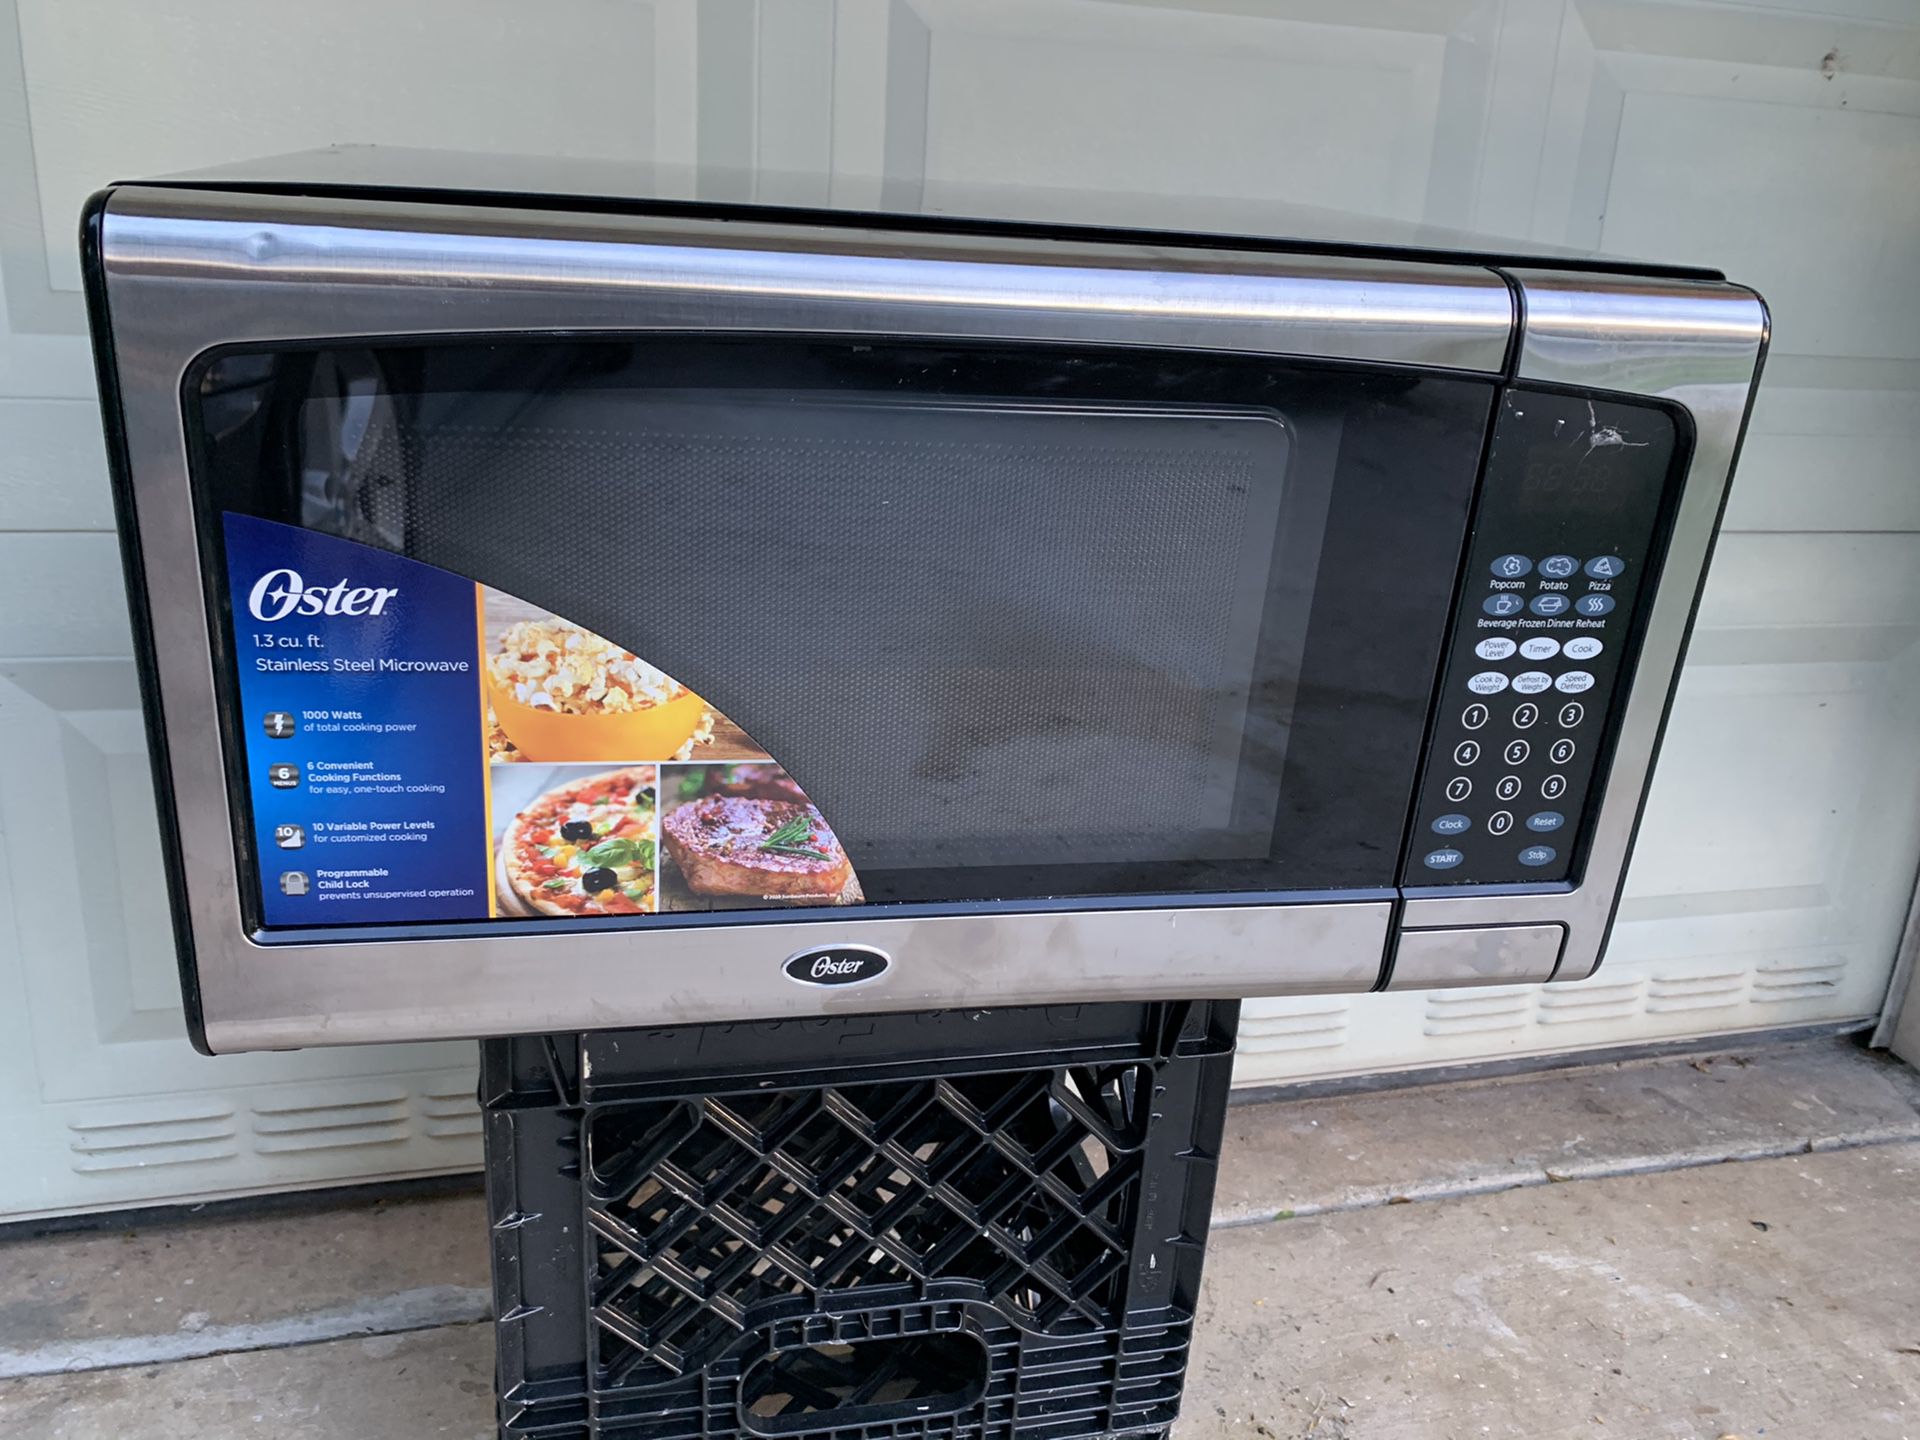 BRAND NEW Microwave Oster 1000 W